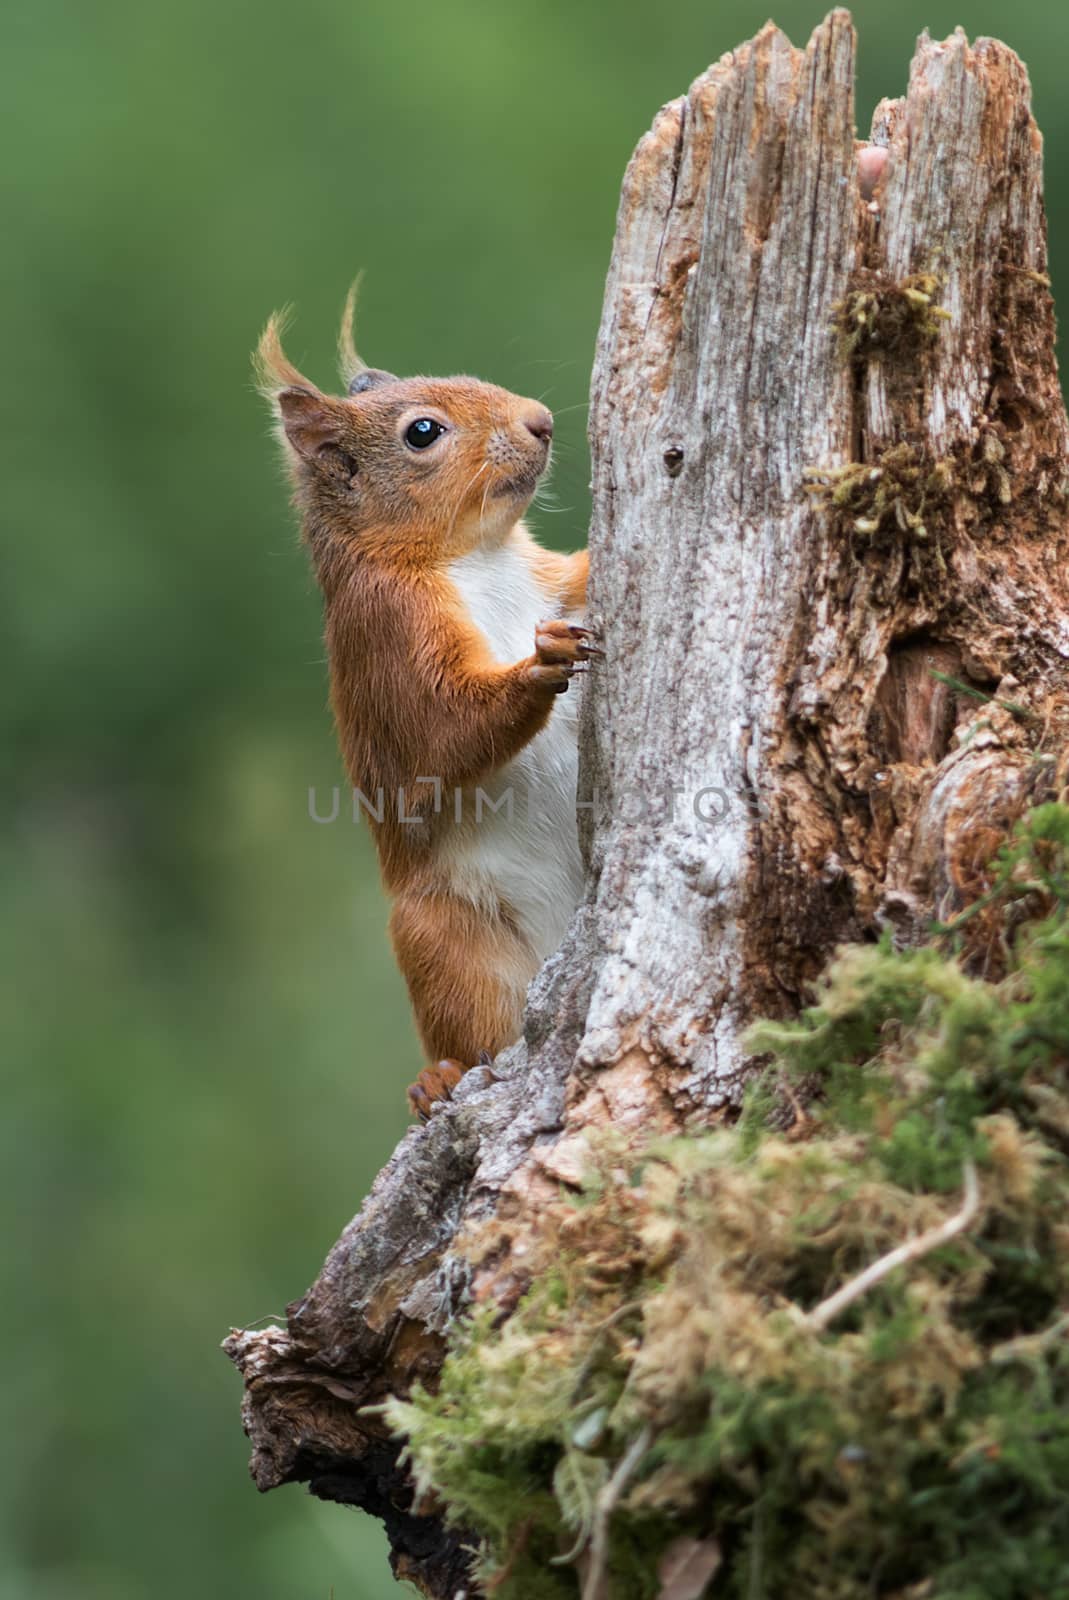 Detailed study close photograph or a red squirrel climbing up an old log tree in upright vertical format